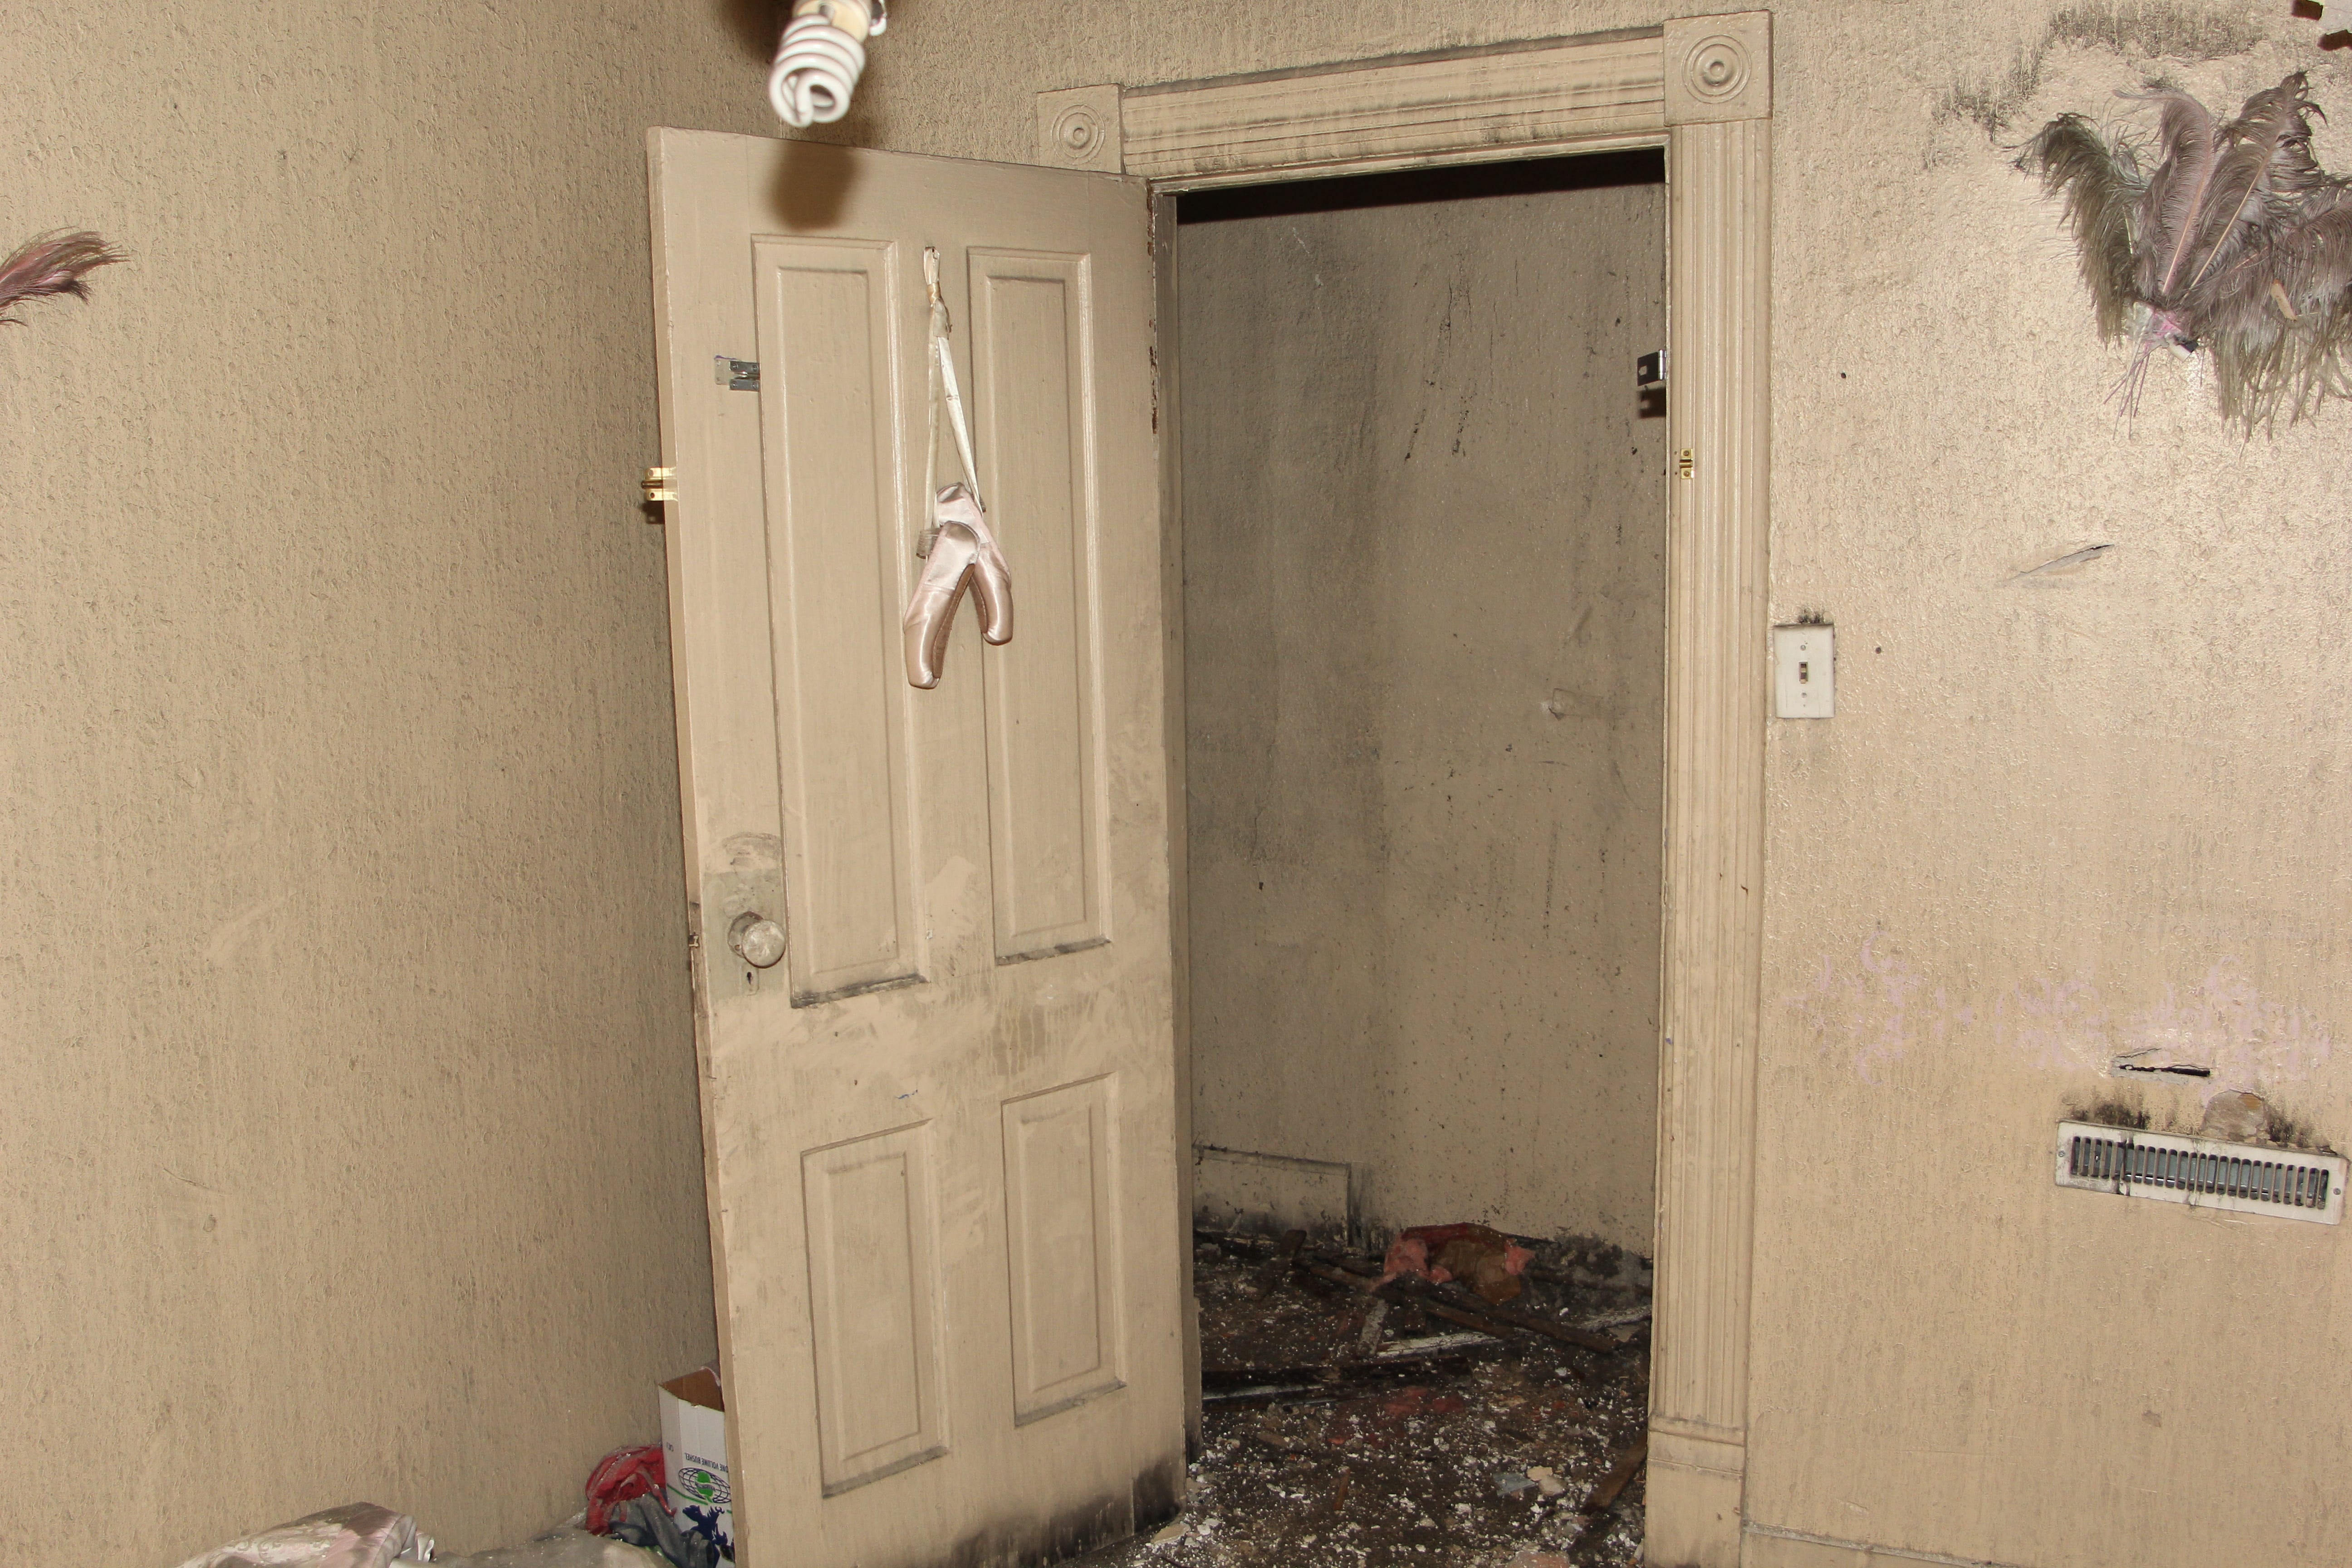 After the fire, ballet slippers hang from a door.